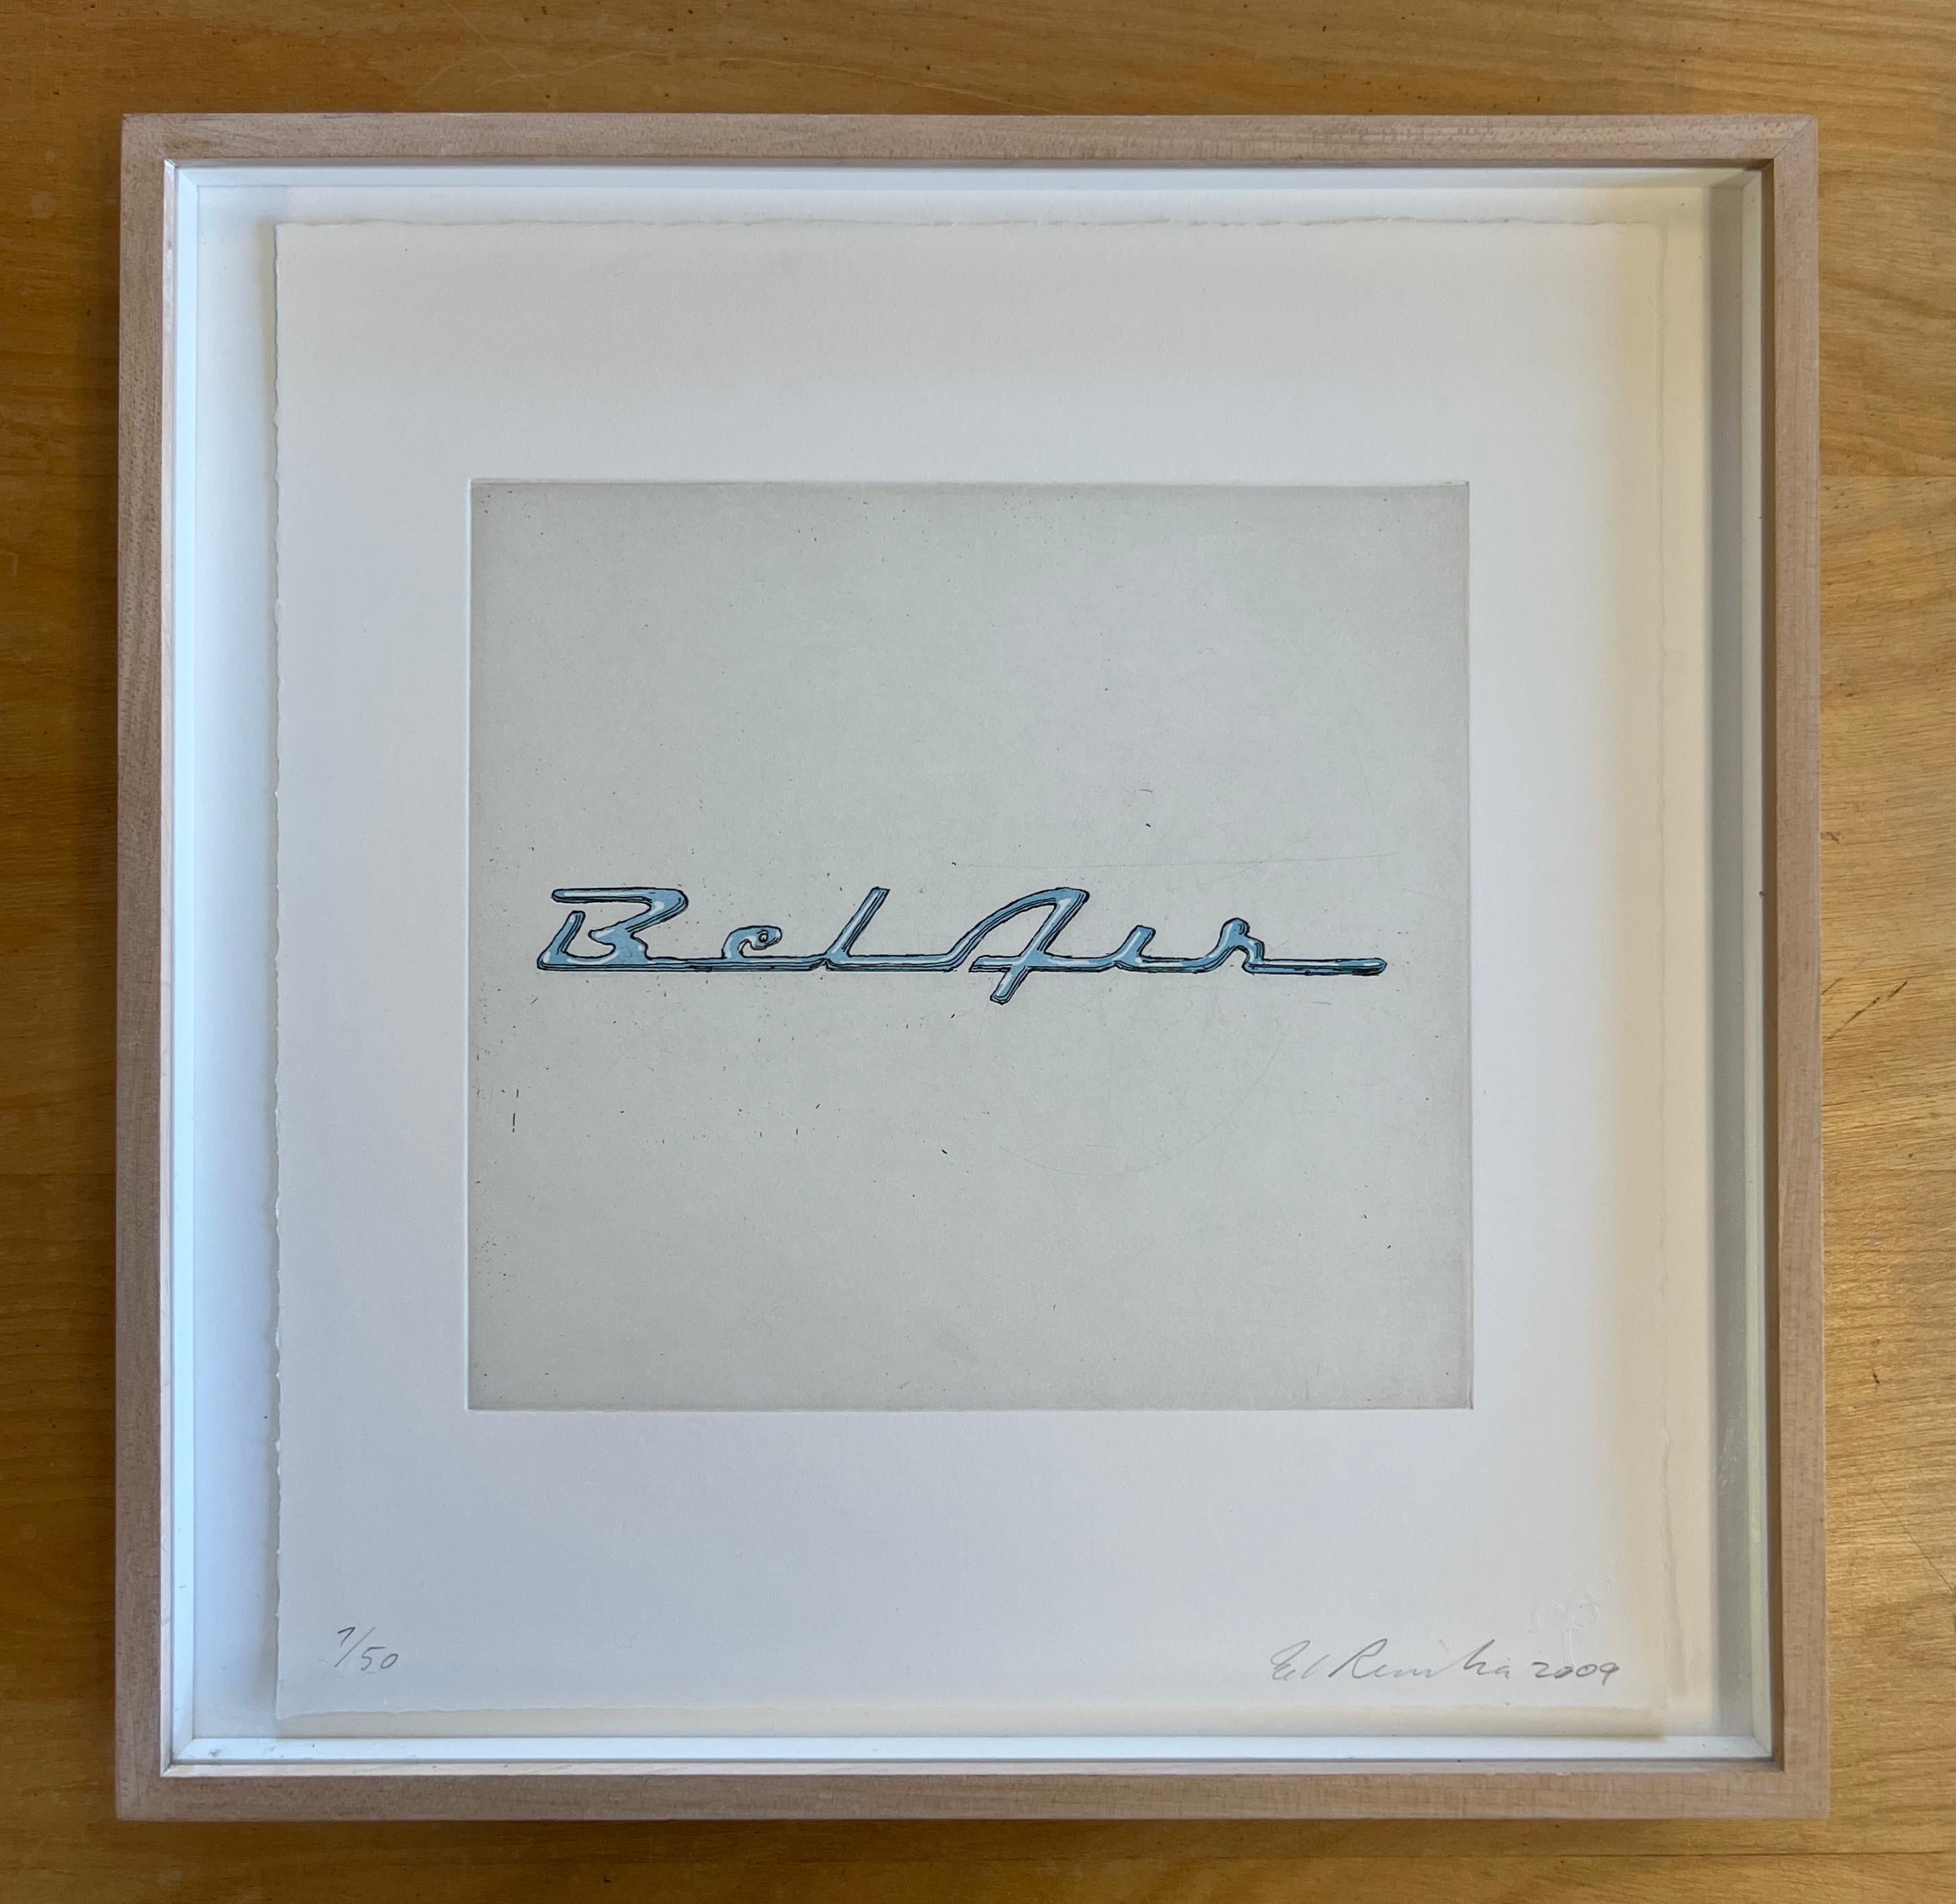 Ed Ruscha “Bel Air” Motor City 2009

This is one of the 